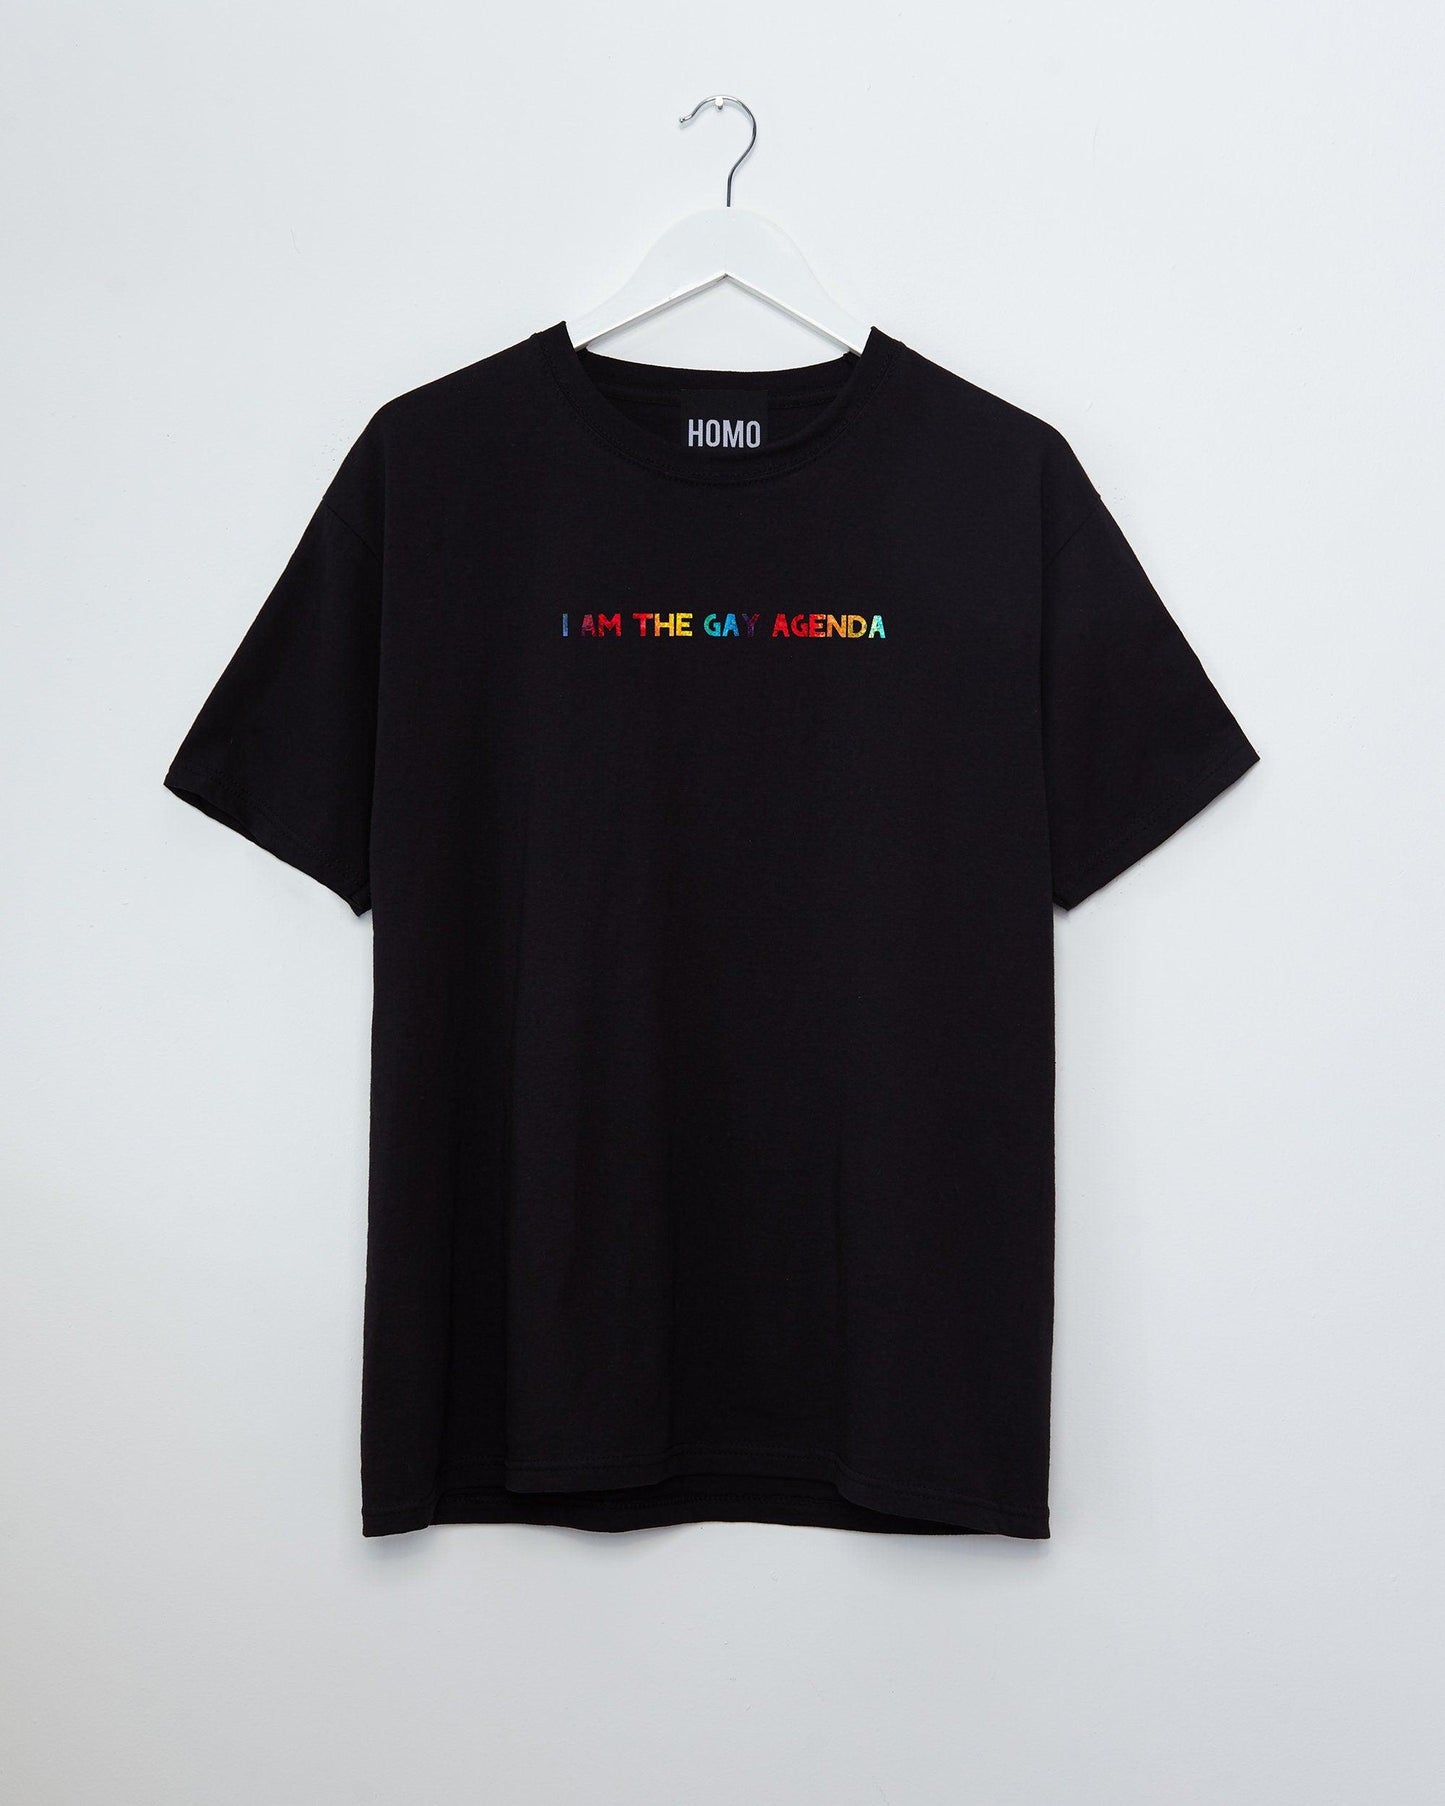 As seen on Married at first sight, I Am The Gay Agenda Tee - Sparkly Rainbow on Black